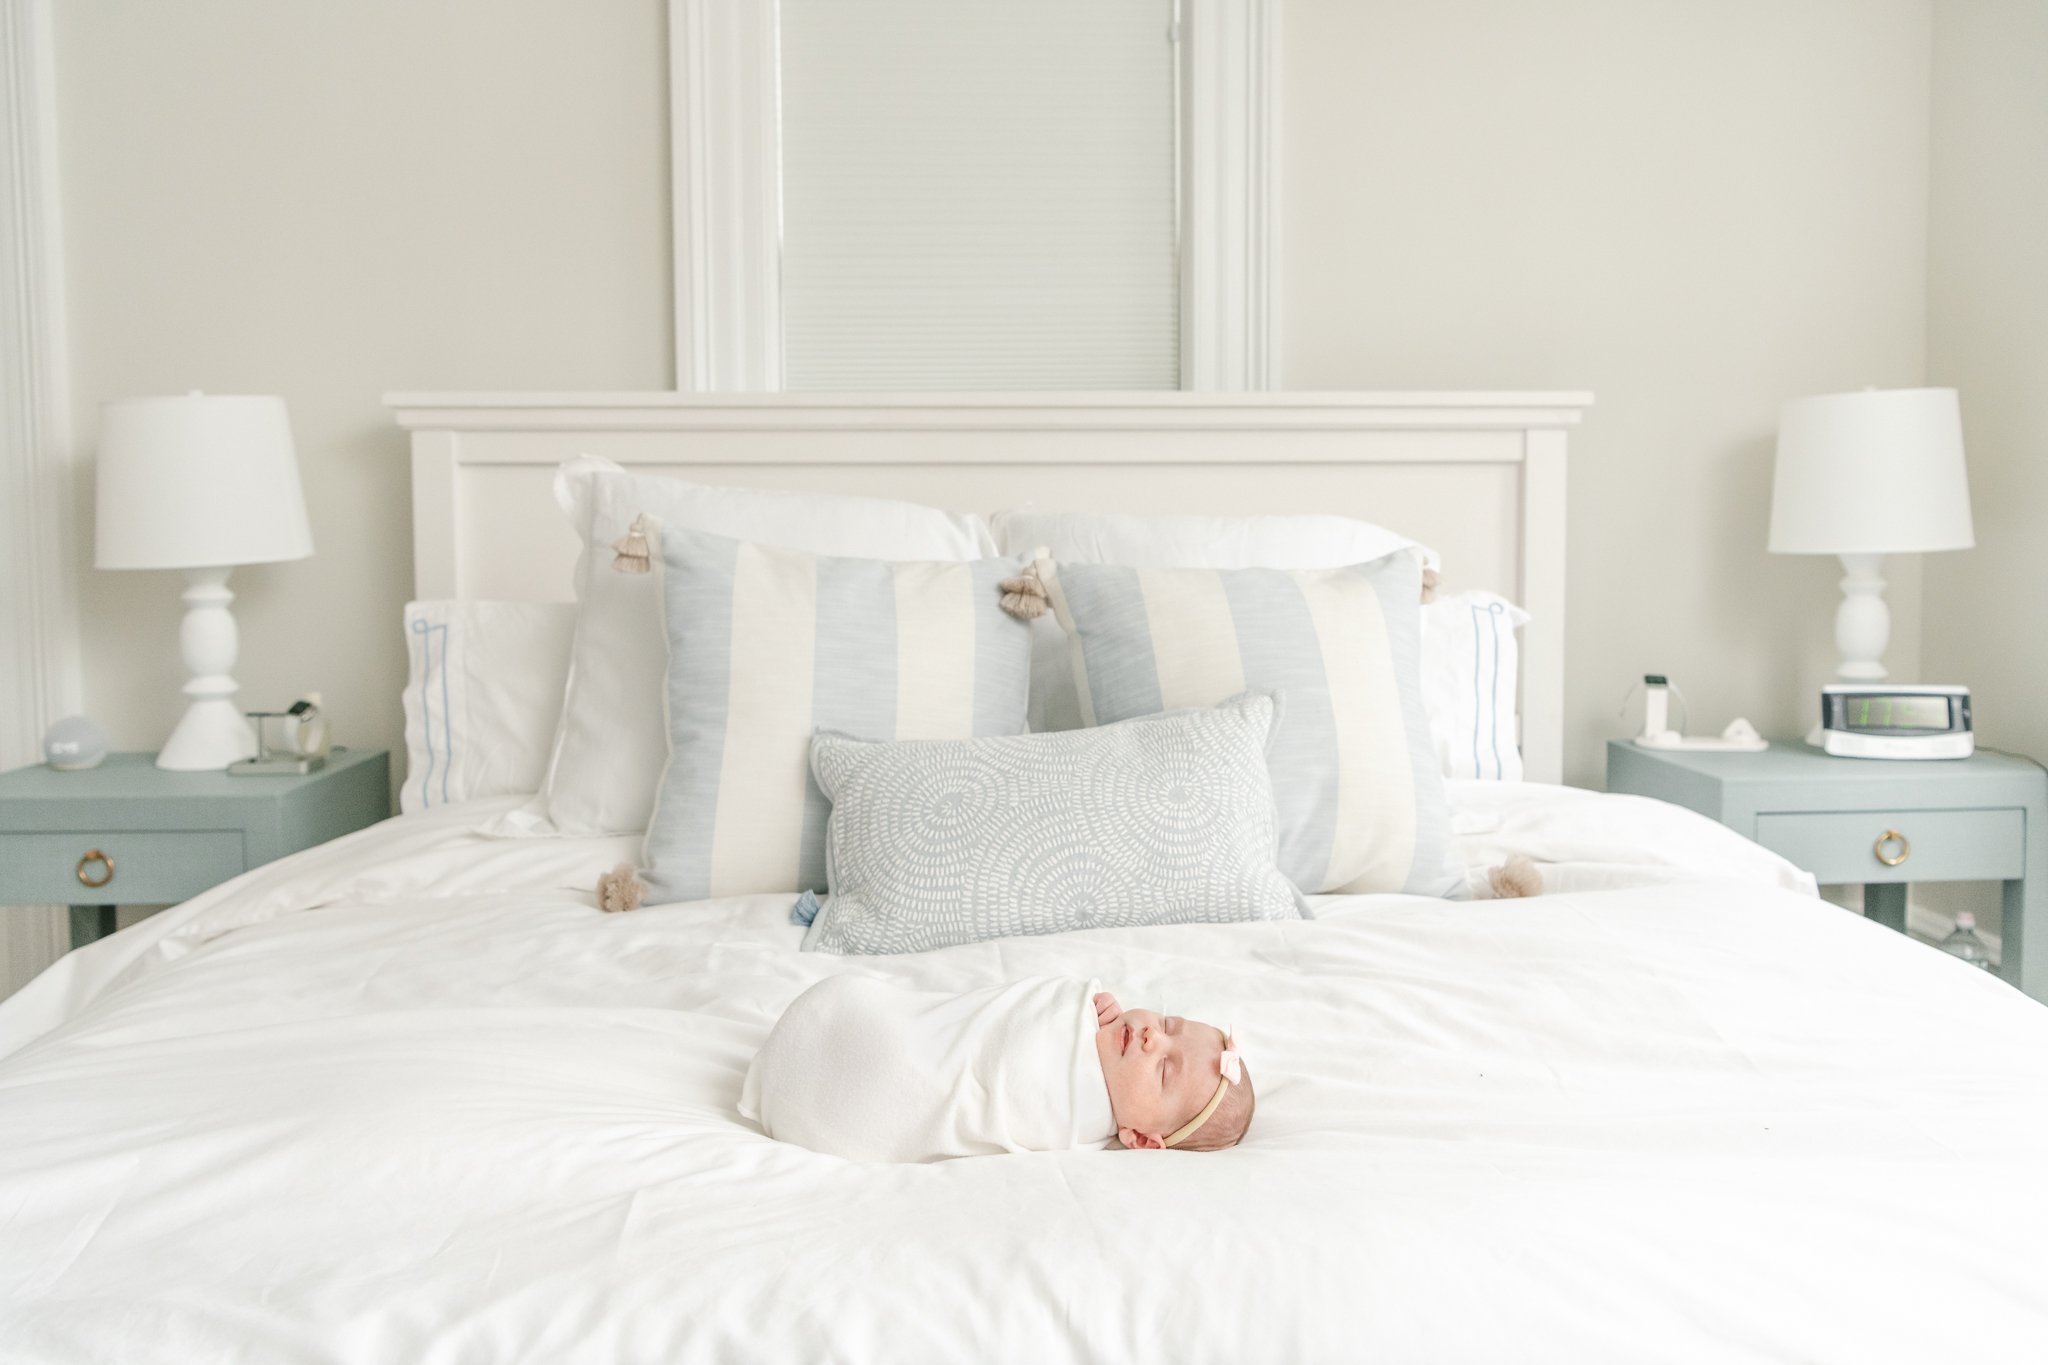  Baby girl swaddled and laying on a white bed and sleeping captured by Nicole Hawkins Photography in MA. newborn photographer in Massachusets #NicoleHawkinsPhotography #NicoleHawkinsNewborns #Babygirl #Newbornfamilyportraits #ChathamNewbornPhotograph